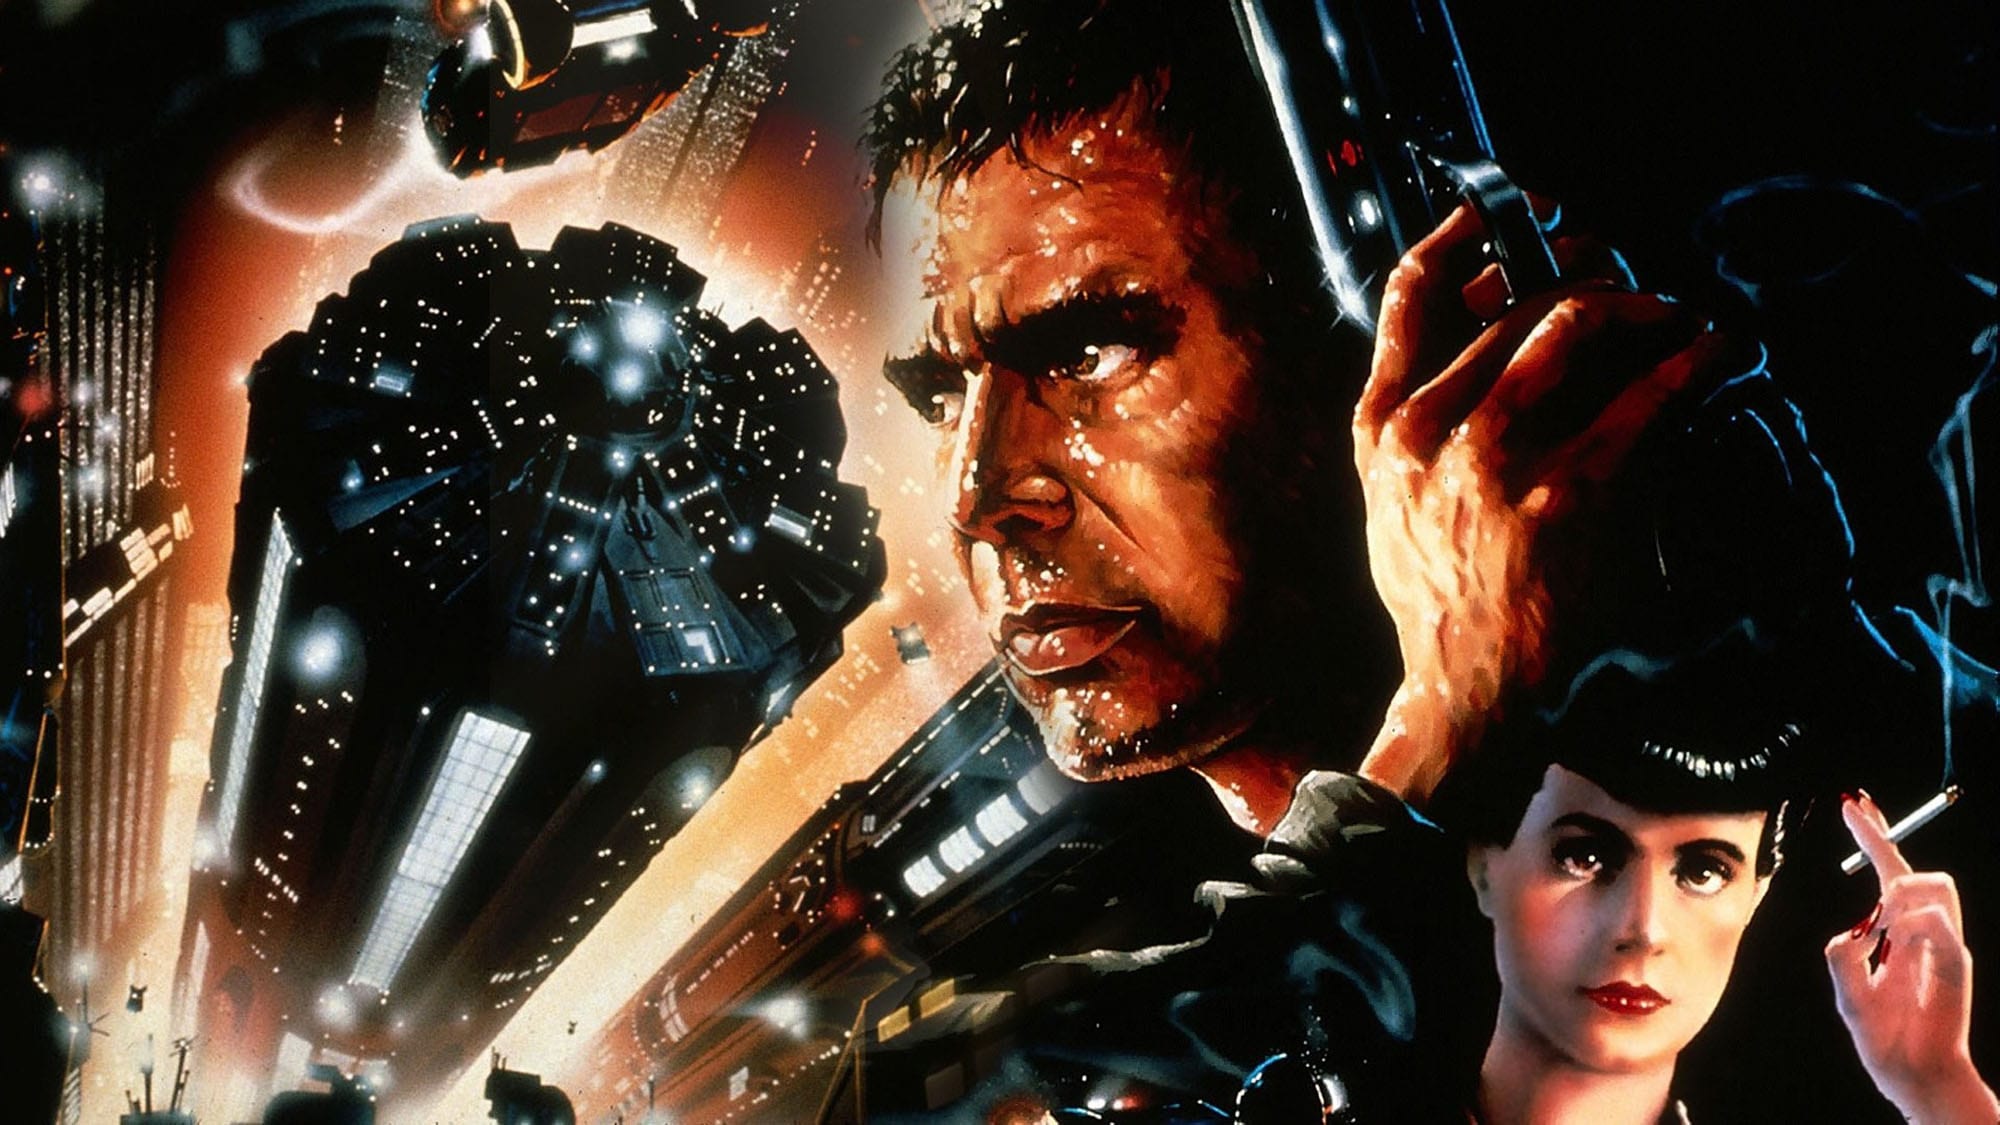 A series of comics & graphic novels exploring the 'Blade Runner' universe is on the way. Here's our list of the best books inspired by movies.